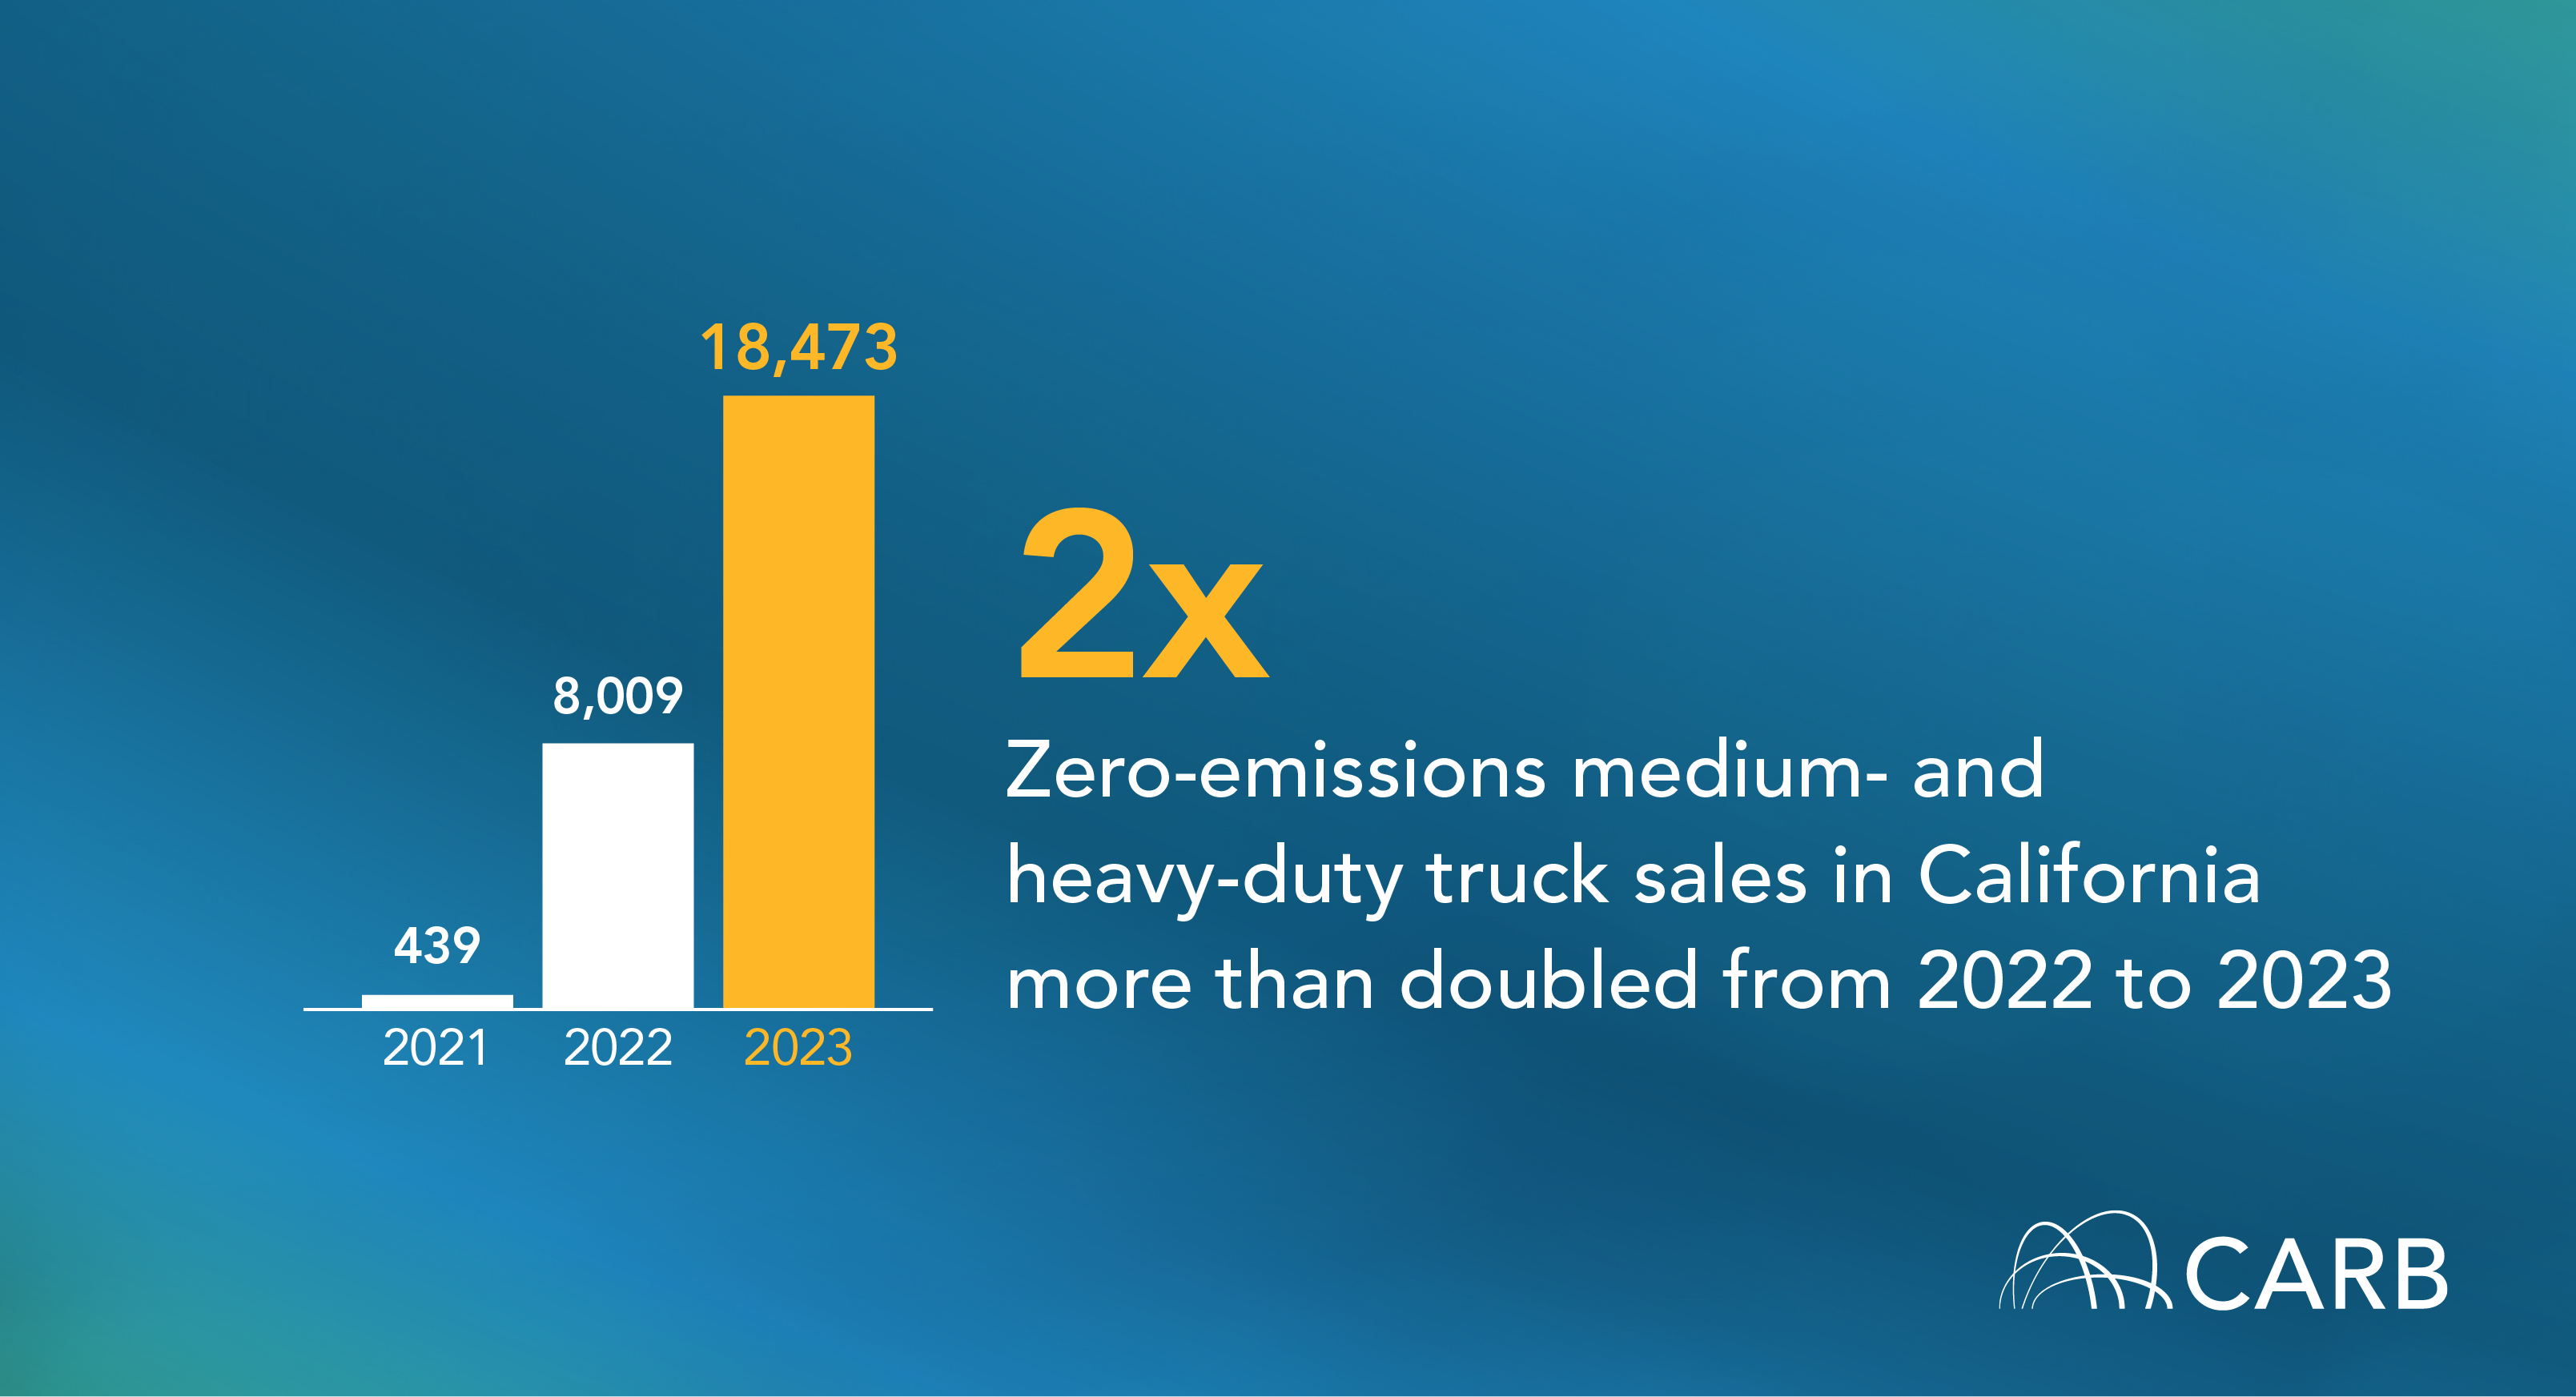 zero-emission medium- and heavy-duty truck sales in California more than doubled